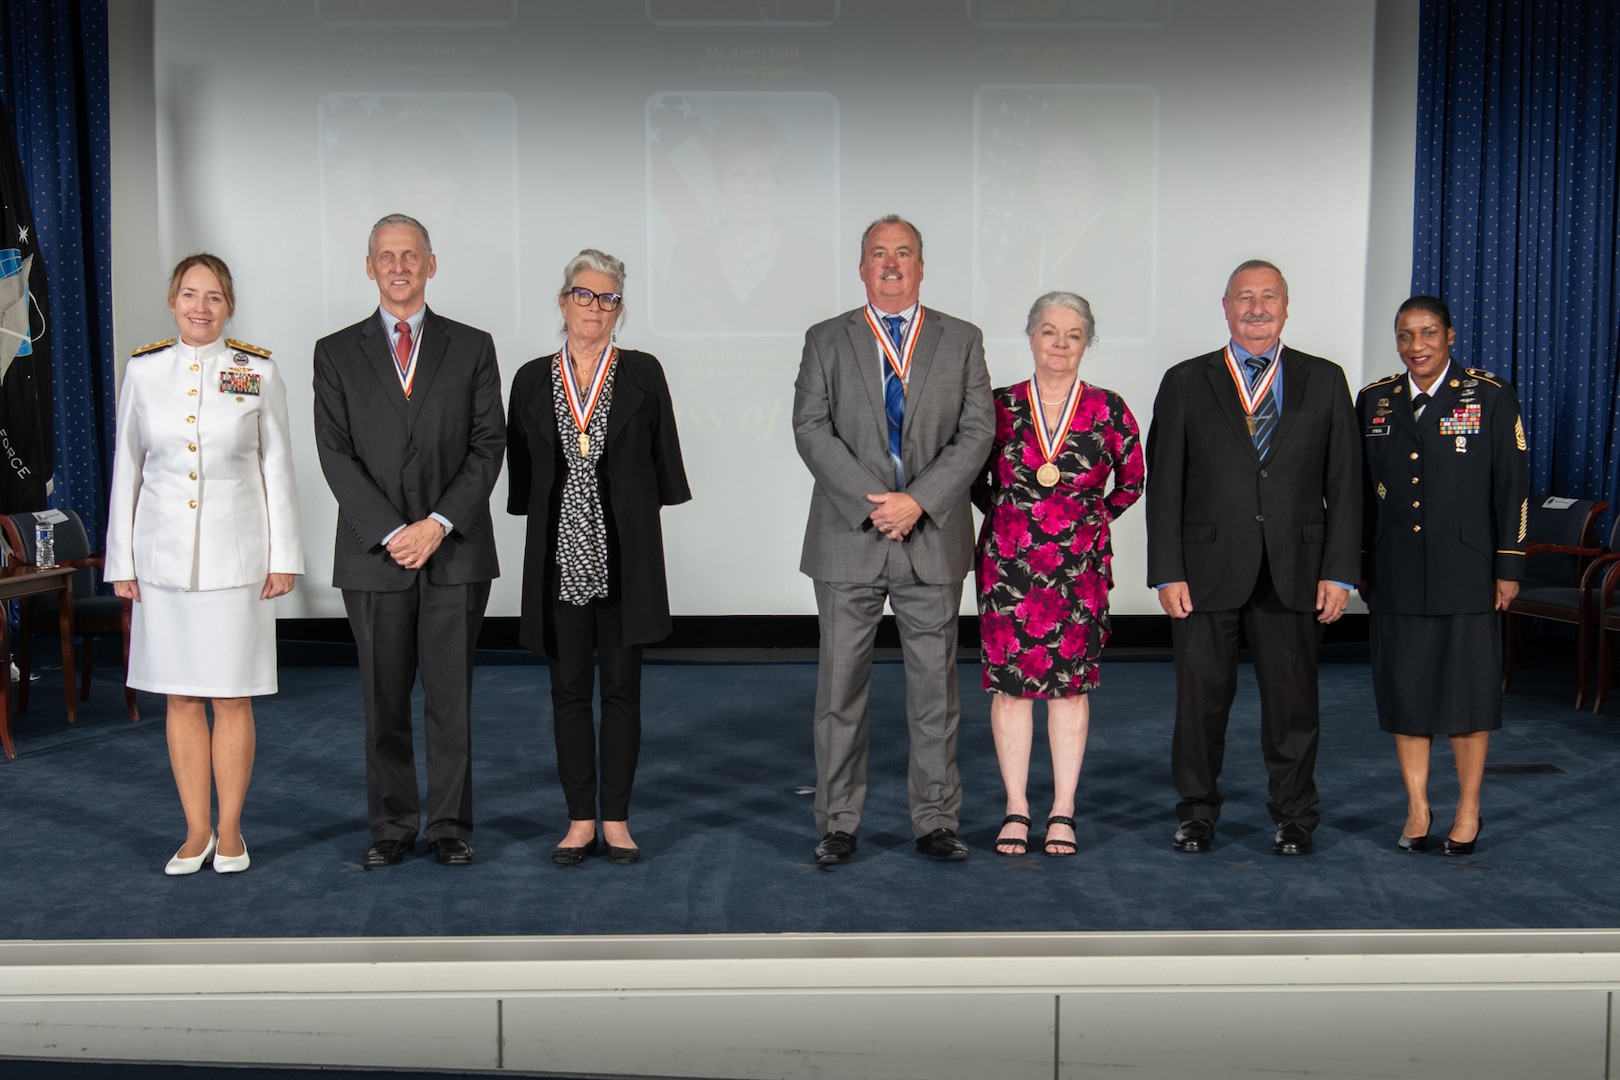 This year's Defense Logistics Agency inductees into the Hall of Fame pose for a group photo.